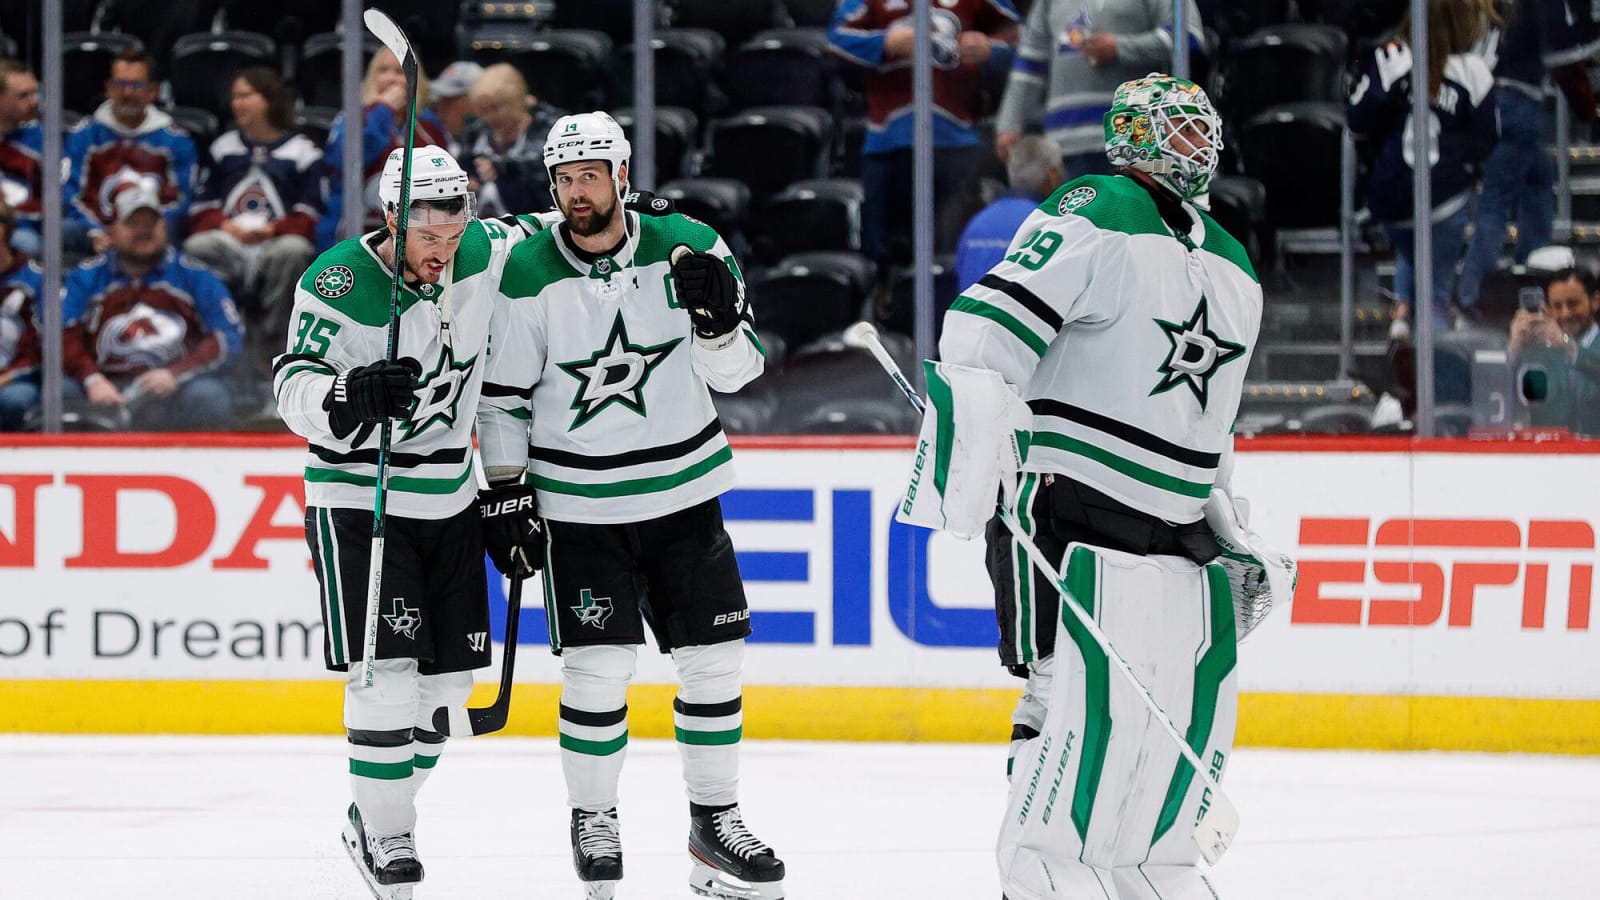 Stars Beat Avalanche 5-1 in Game 4, Head Home Up 3-1 in Series